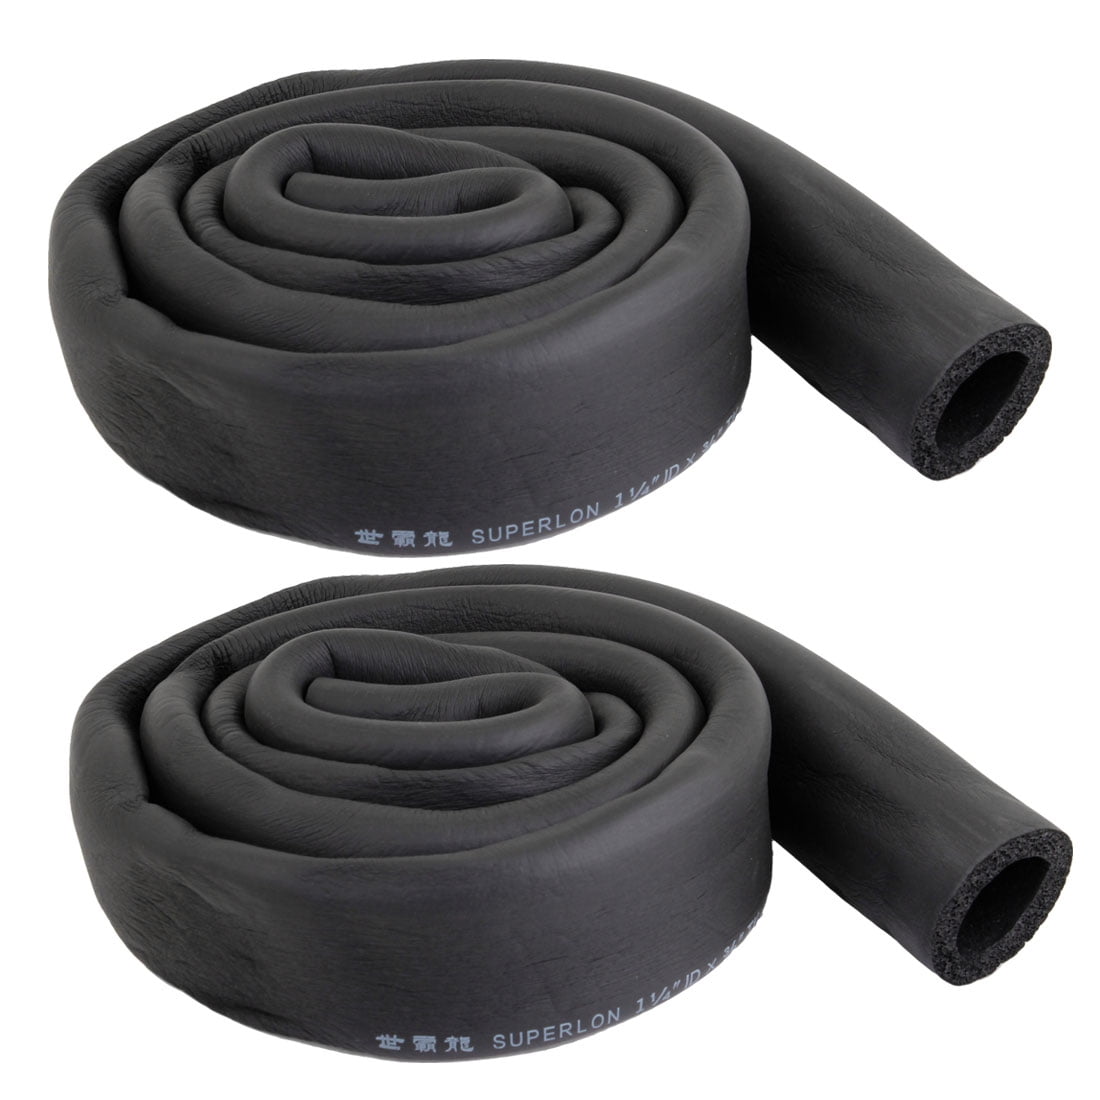 Agger Air Conditioner Foam Heat Insulated Pipe Black Water-pipe Insulation Cotton 3/8 x 1/4